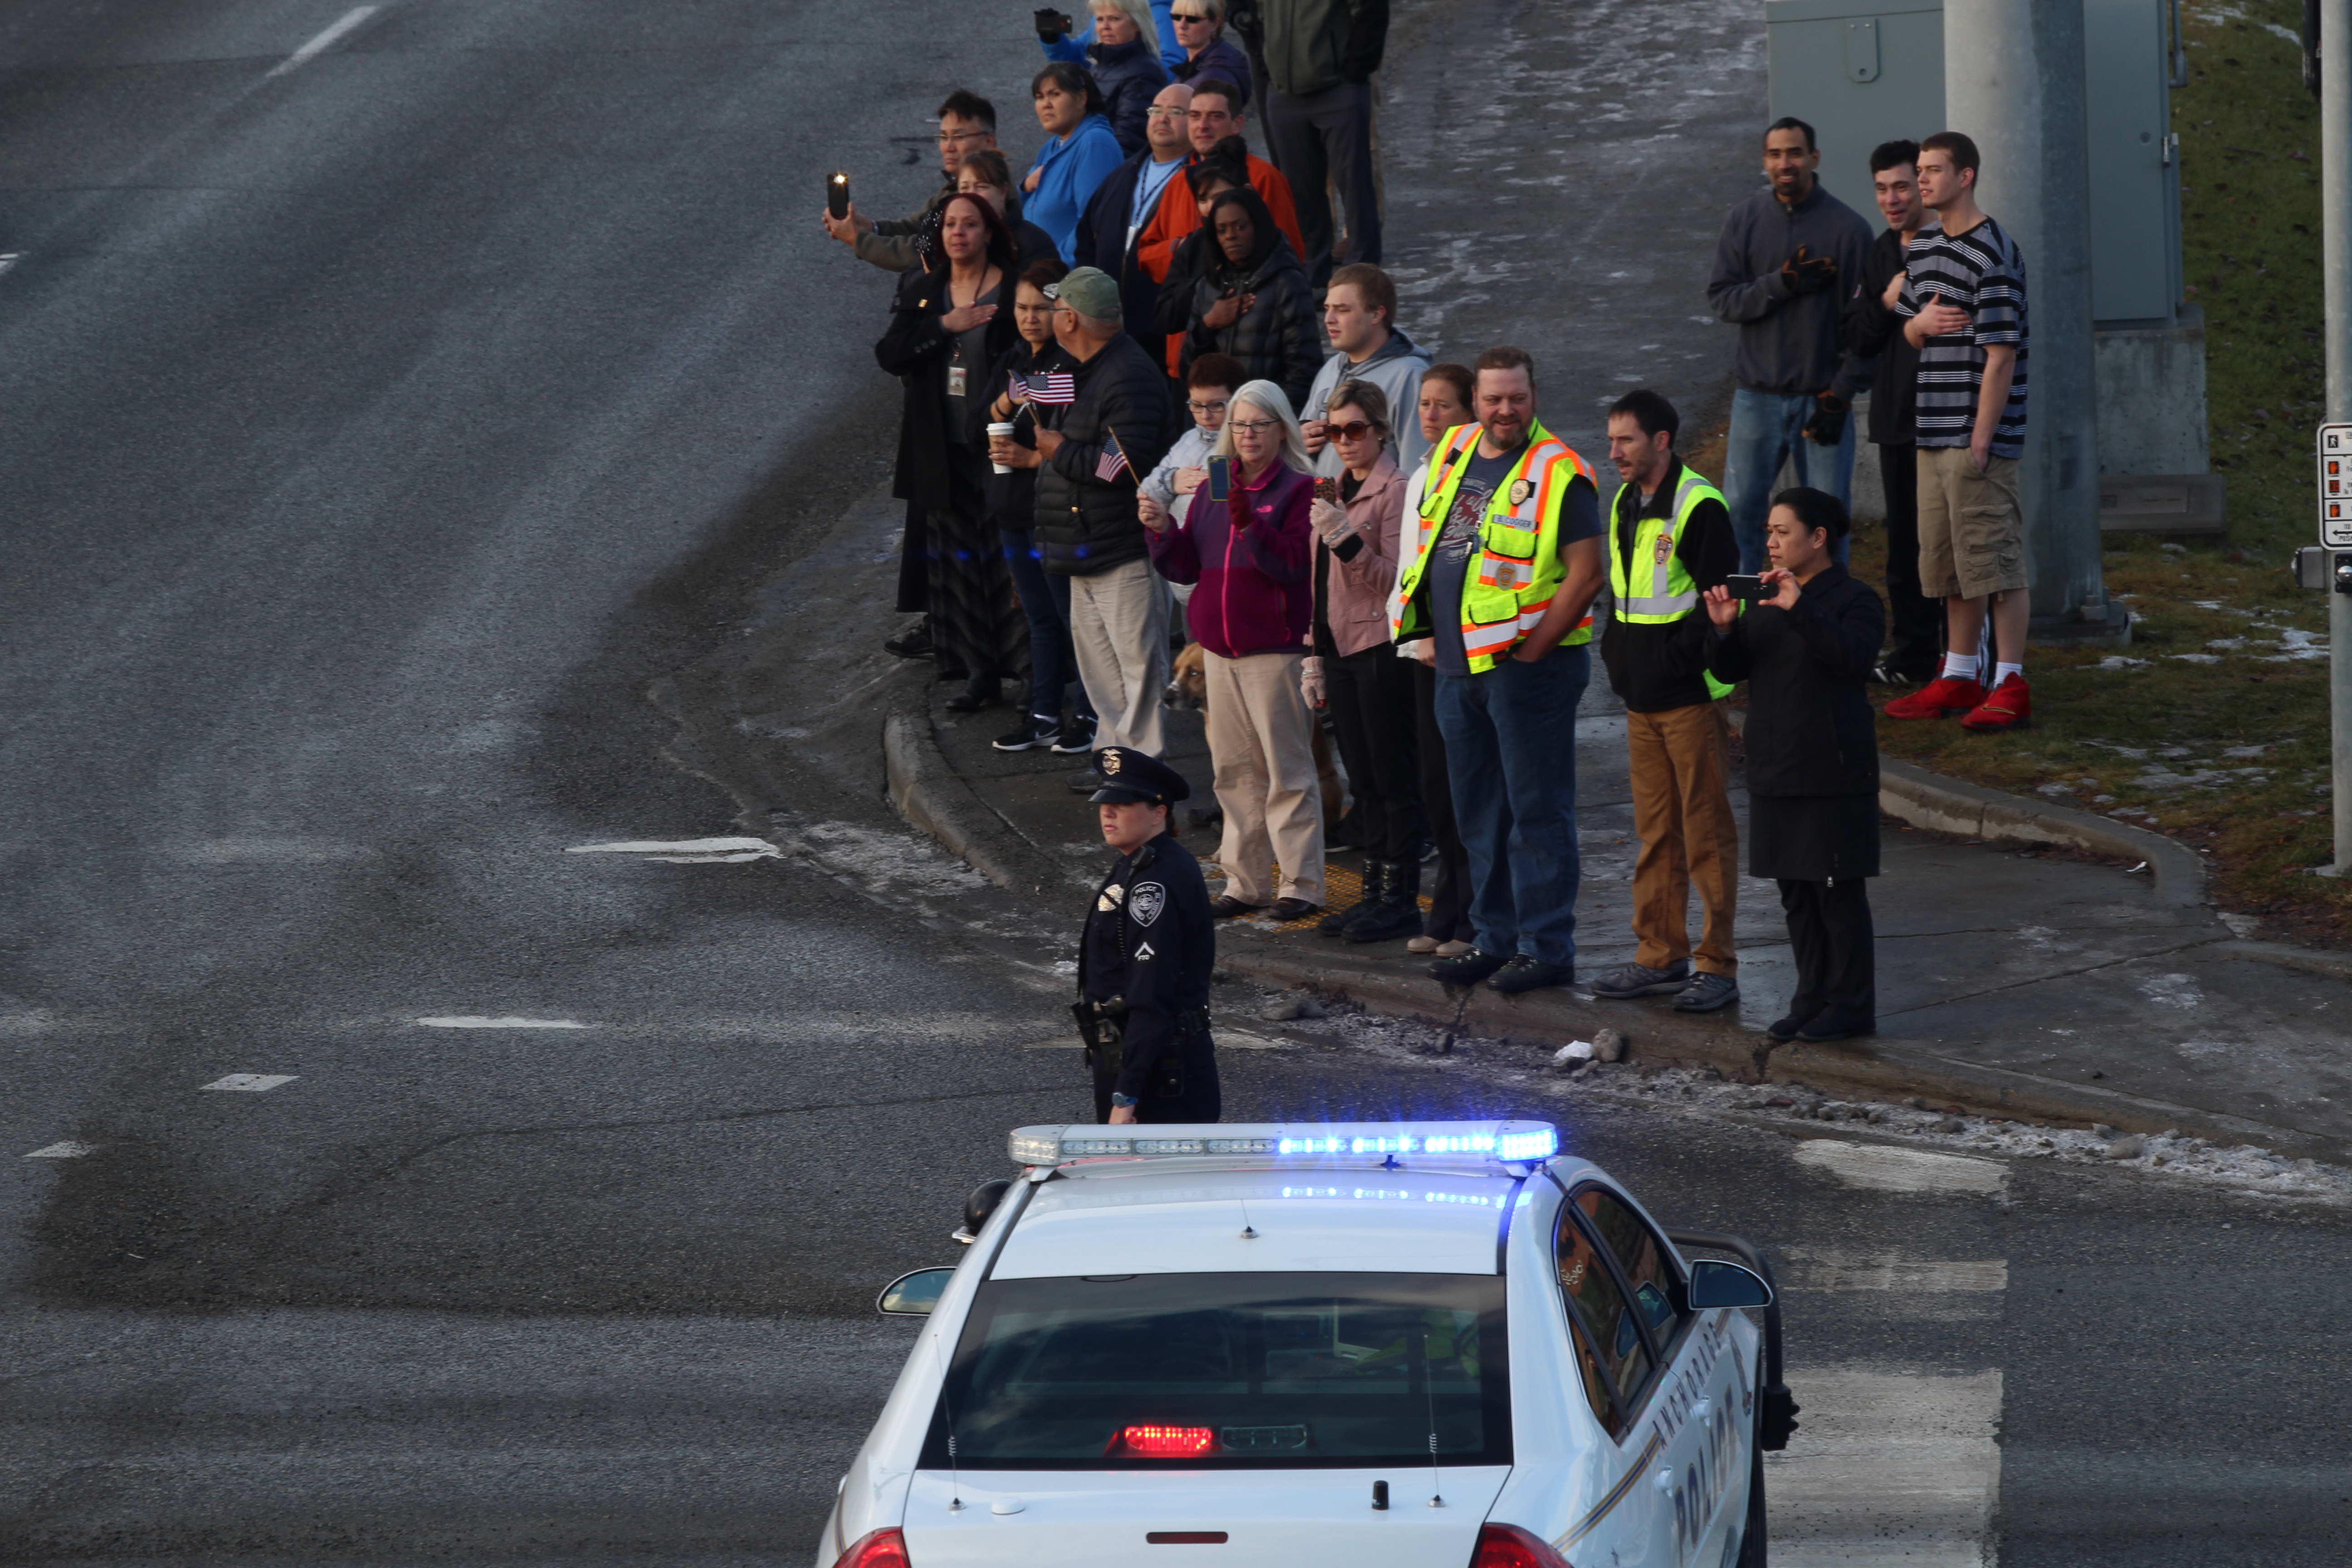 Police block off Tudor road as the procession for Allen Brandt moves through. Citizens stand to the side and watch. (Photo by Wesley Early, Alaska Public Media)